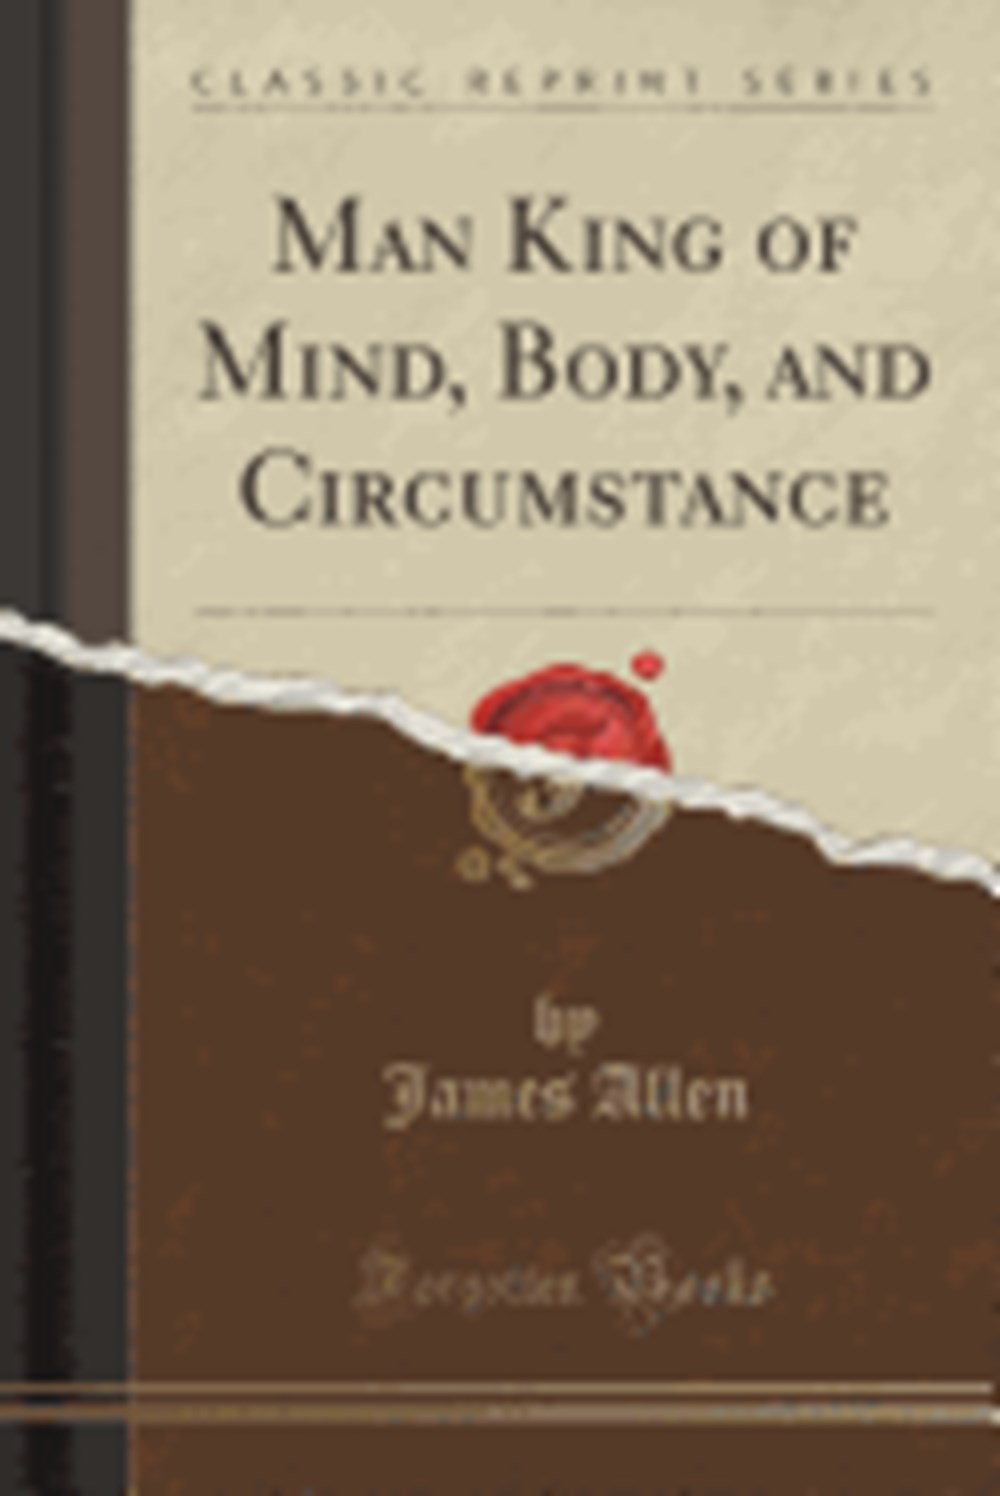 Man King of Mind, Body, and Circumstance (Classic Reprint)